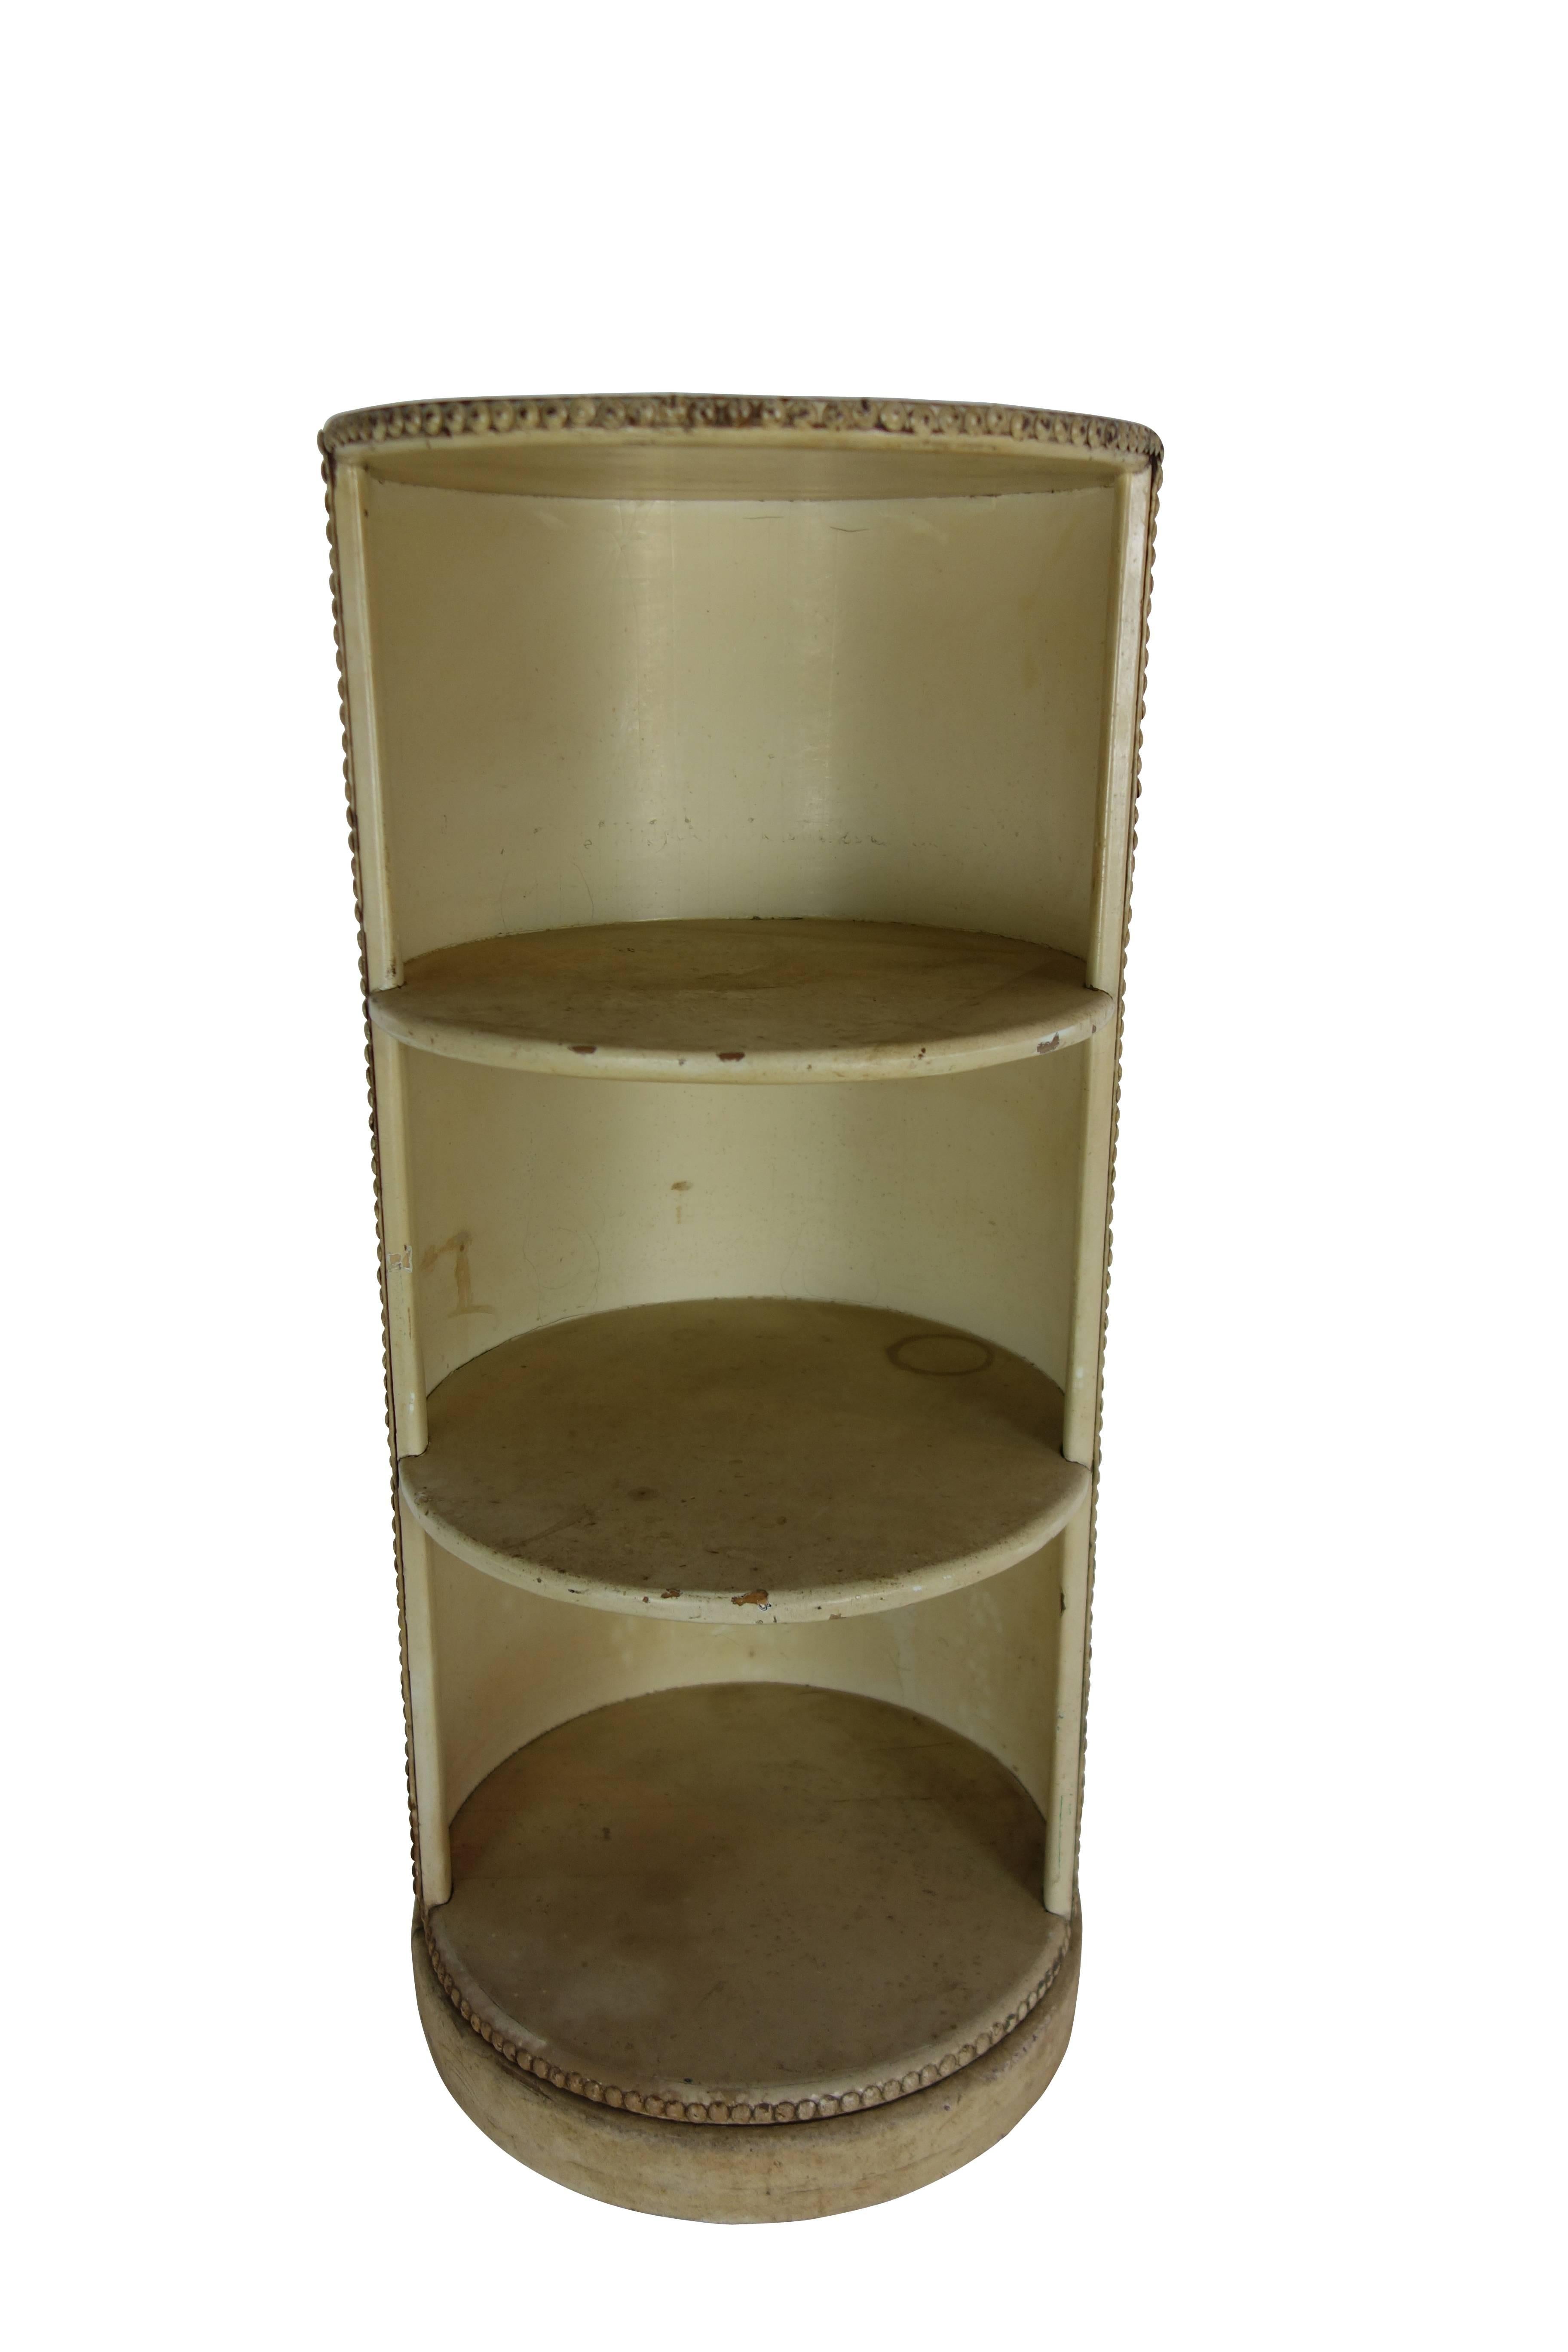 This is a unique circular three-tiered shelf wrapped in cream leather with rivet detail, circa 1920.